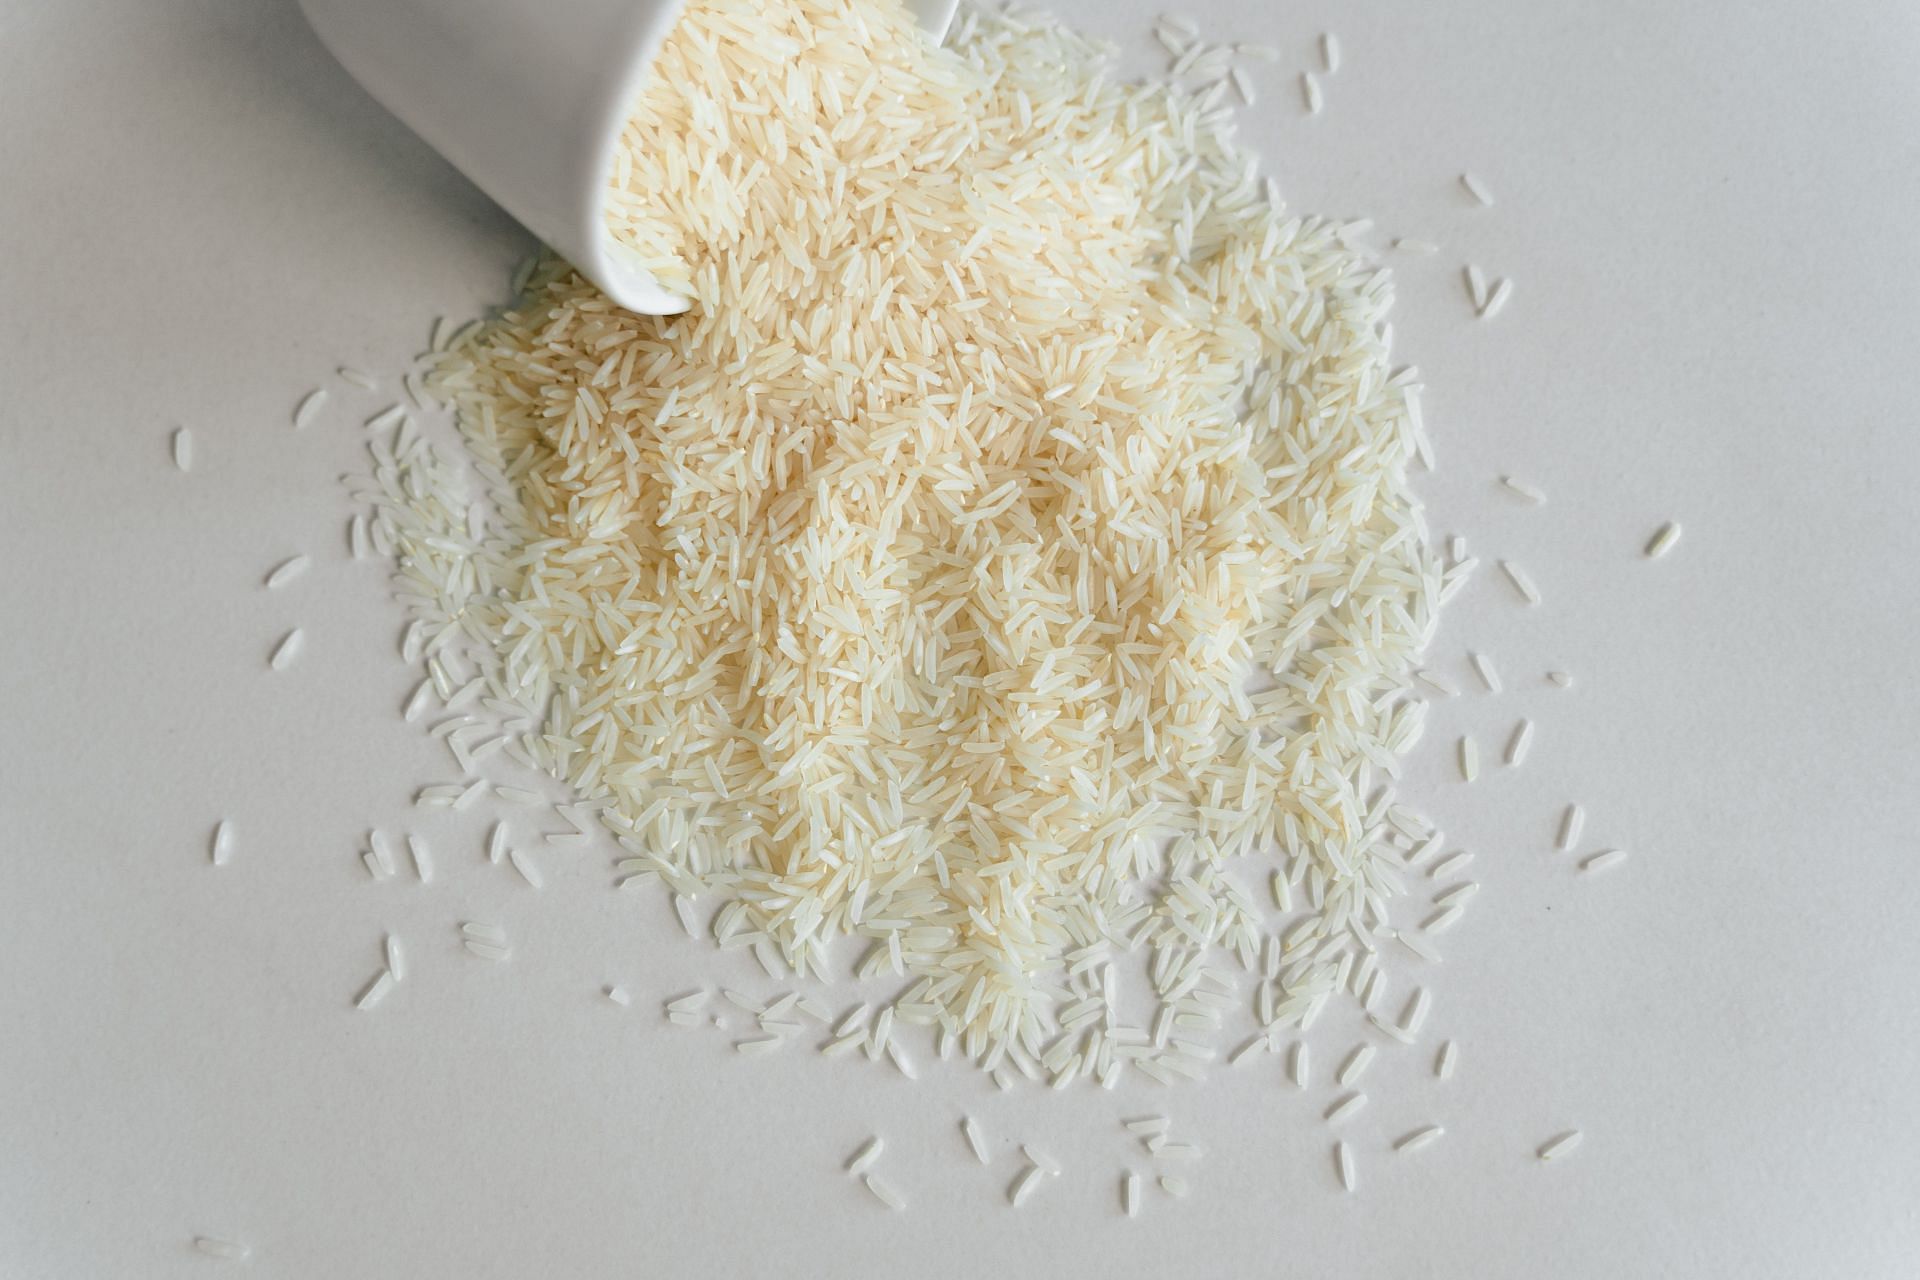 Rice water for hair growth (Image via Unsplash/Mart Production)